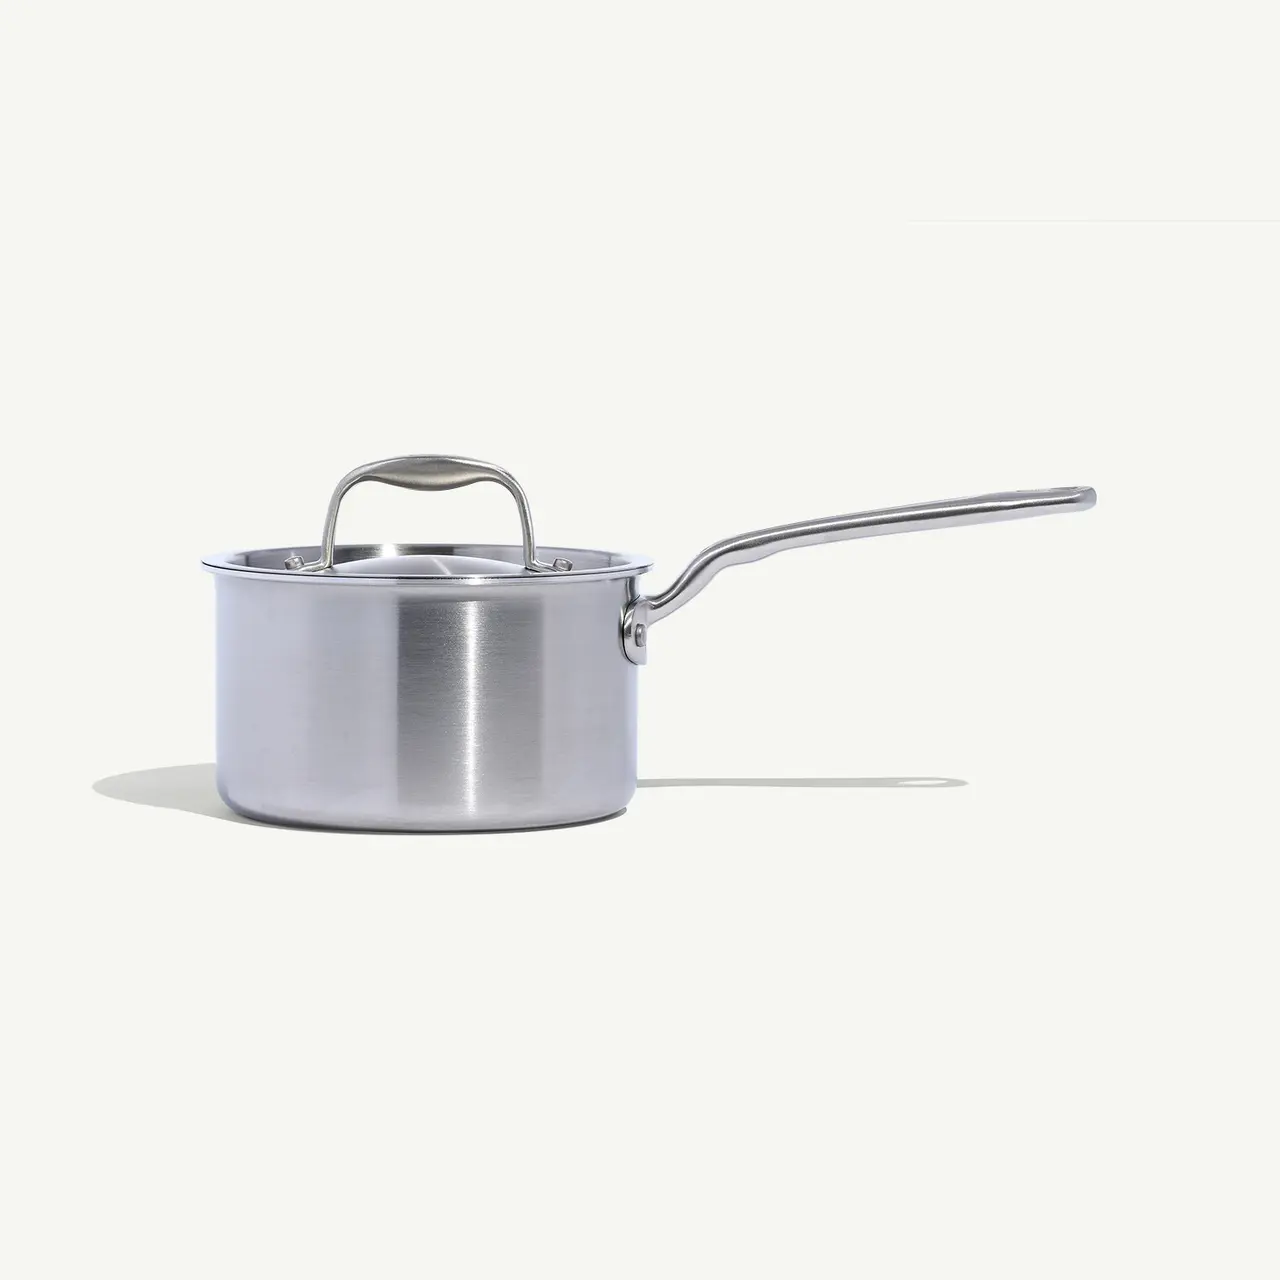 A stainless steel saucepan with a long handle against a white background.